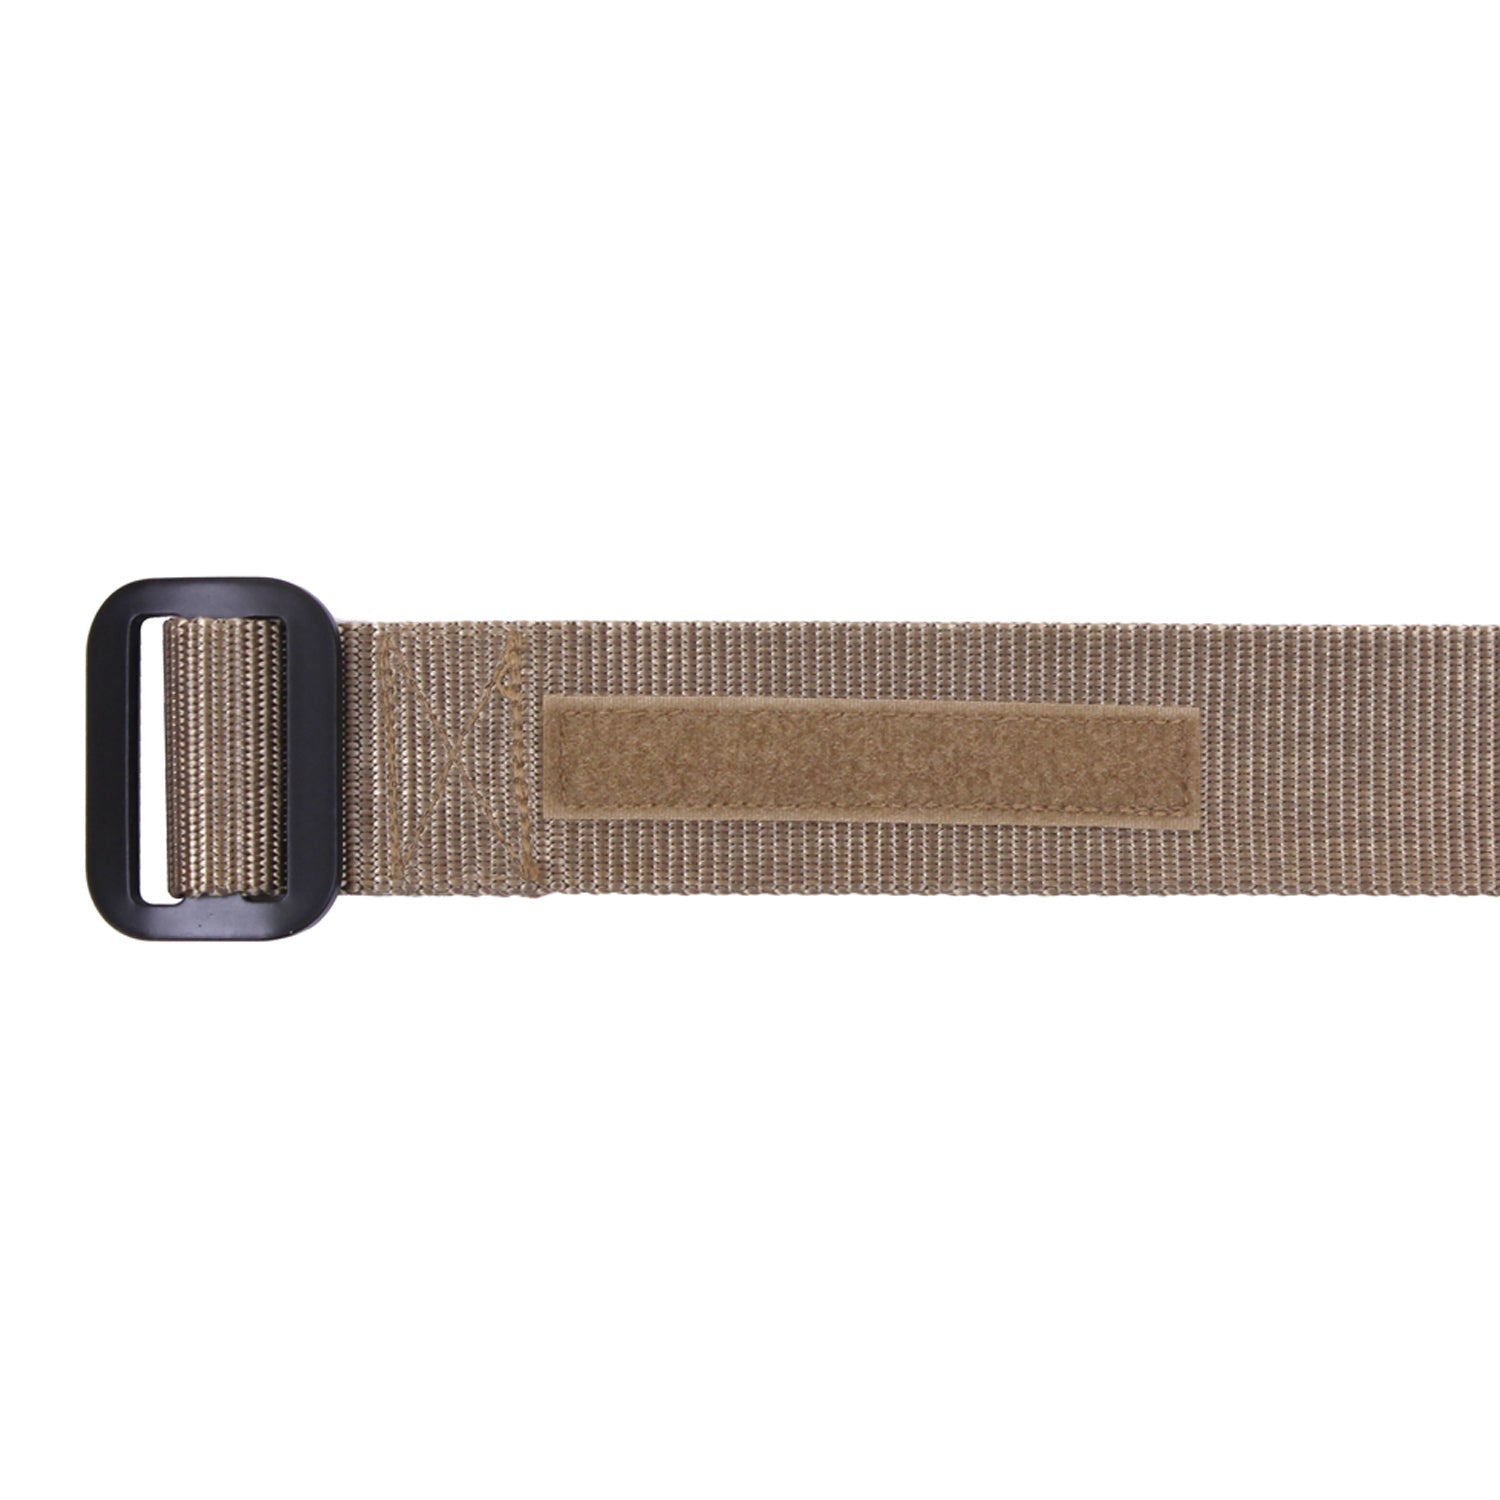 Rothco's Coyote Military Riggers Belt is U.S. military compliant according to DA PAM 670-1/AR 670-1. The tactical belt's coyote color meets the Army's new regulations and can be worn with your OCP Scorpion Uniform. The riggers belt is also available in additional colors. 